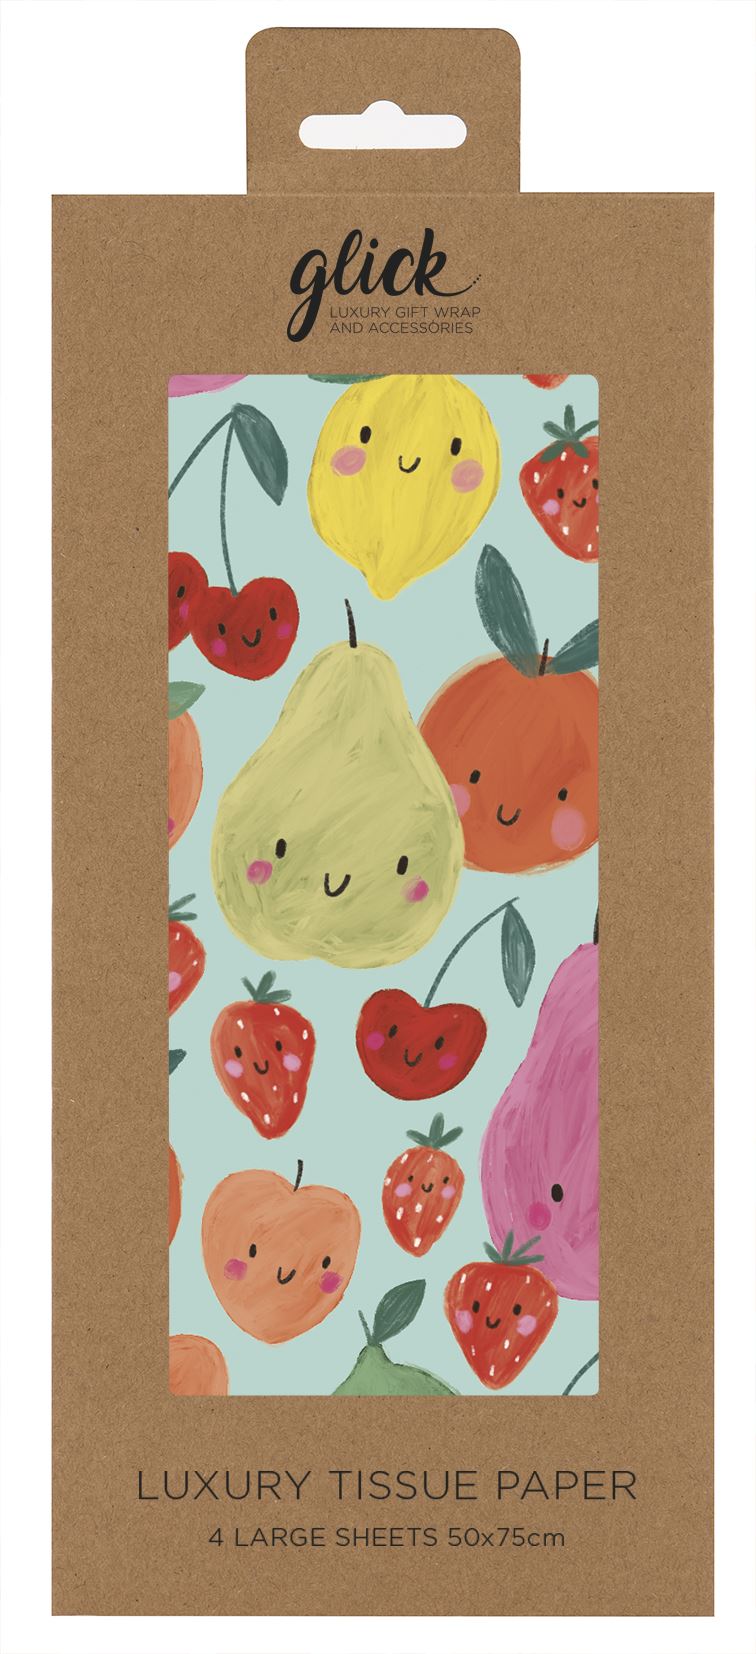 Retail packaging for A rectangular sheet of tissue paper with a sage green background covered in fruit with happy smiling faces. The artwork is painted in a kawaii style. The fruit shown are pears, strawberries, cherries, peaches, oranges and lemons.